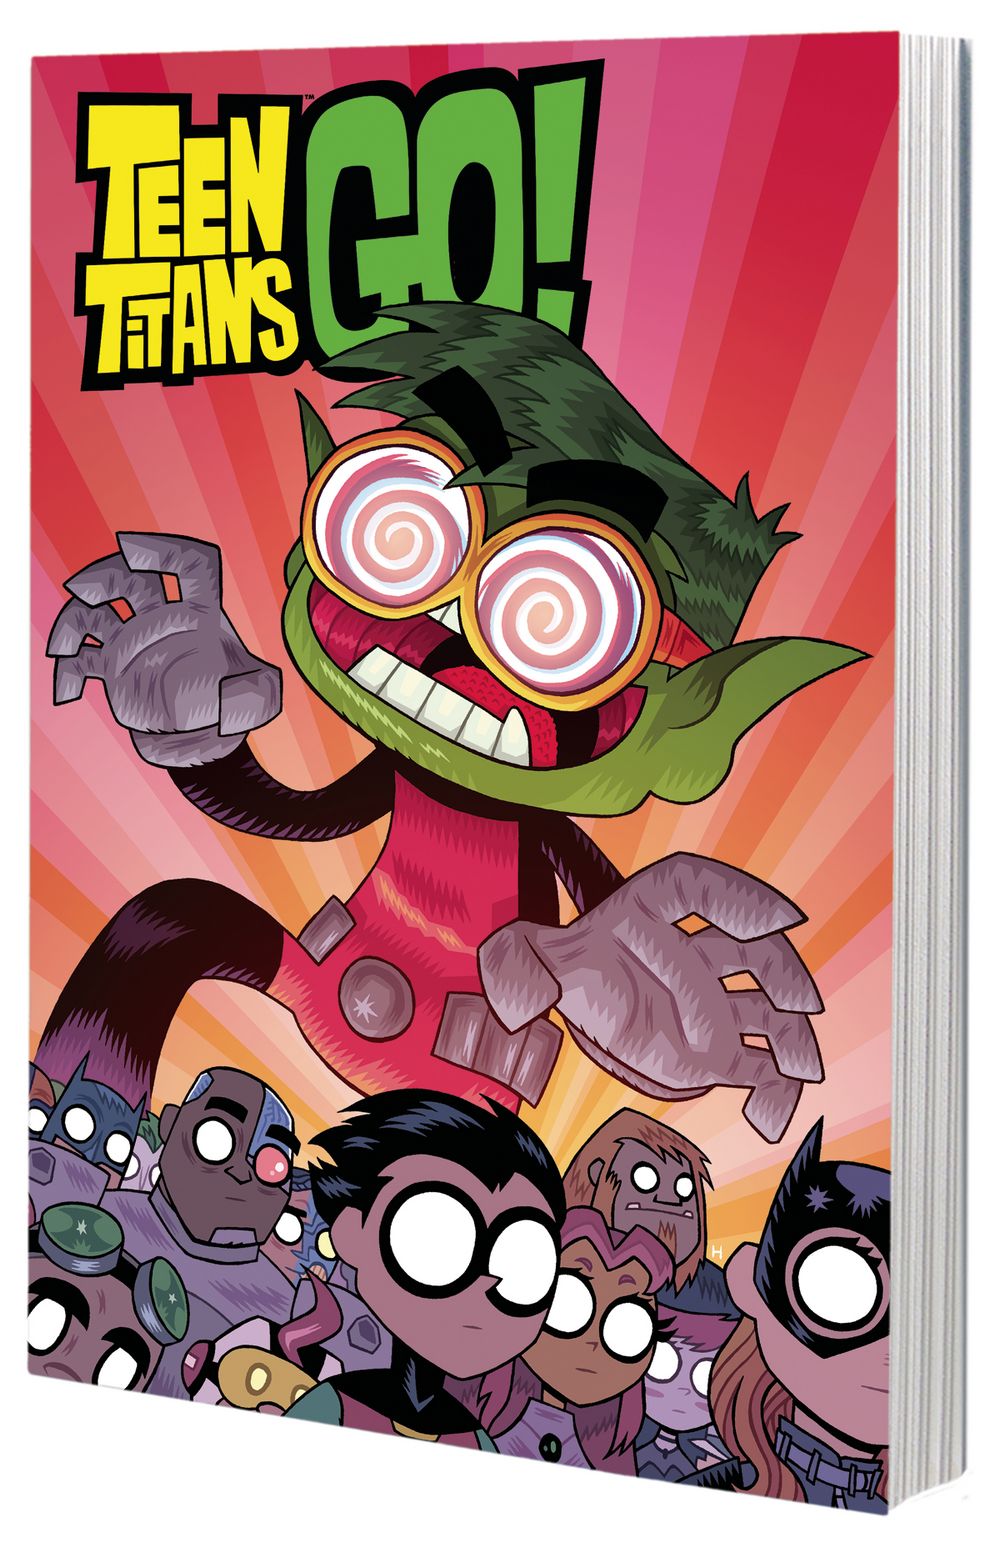 Teen Titans Go TP VOL 02 Ready For Action